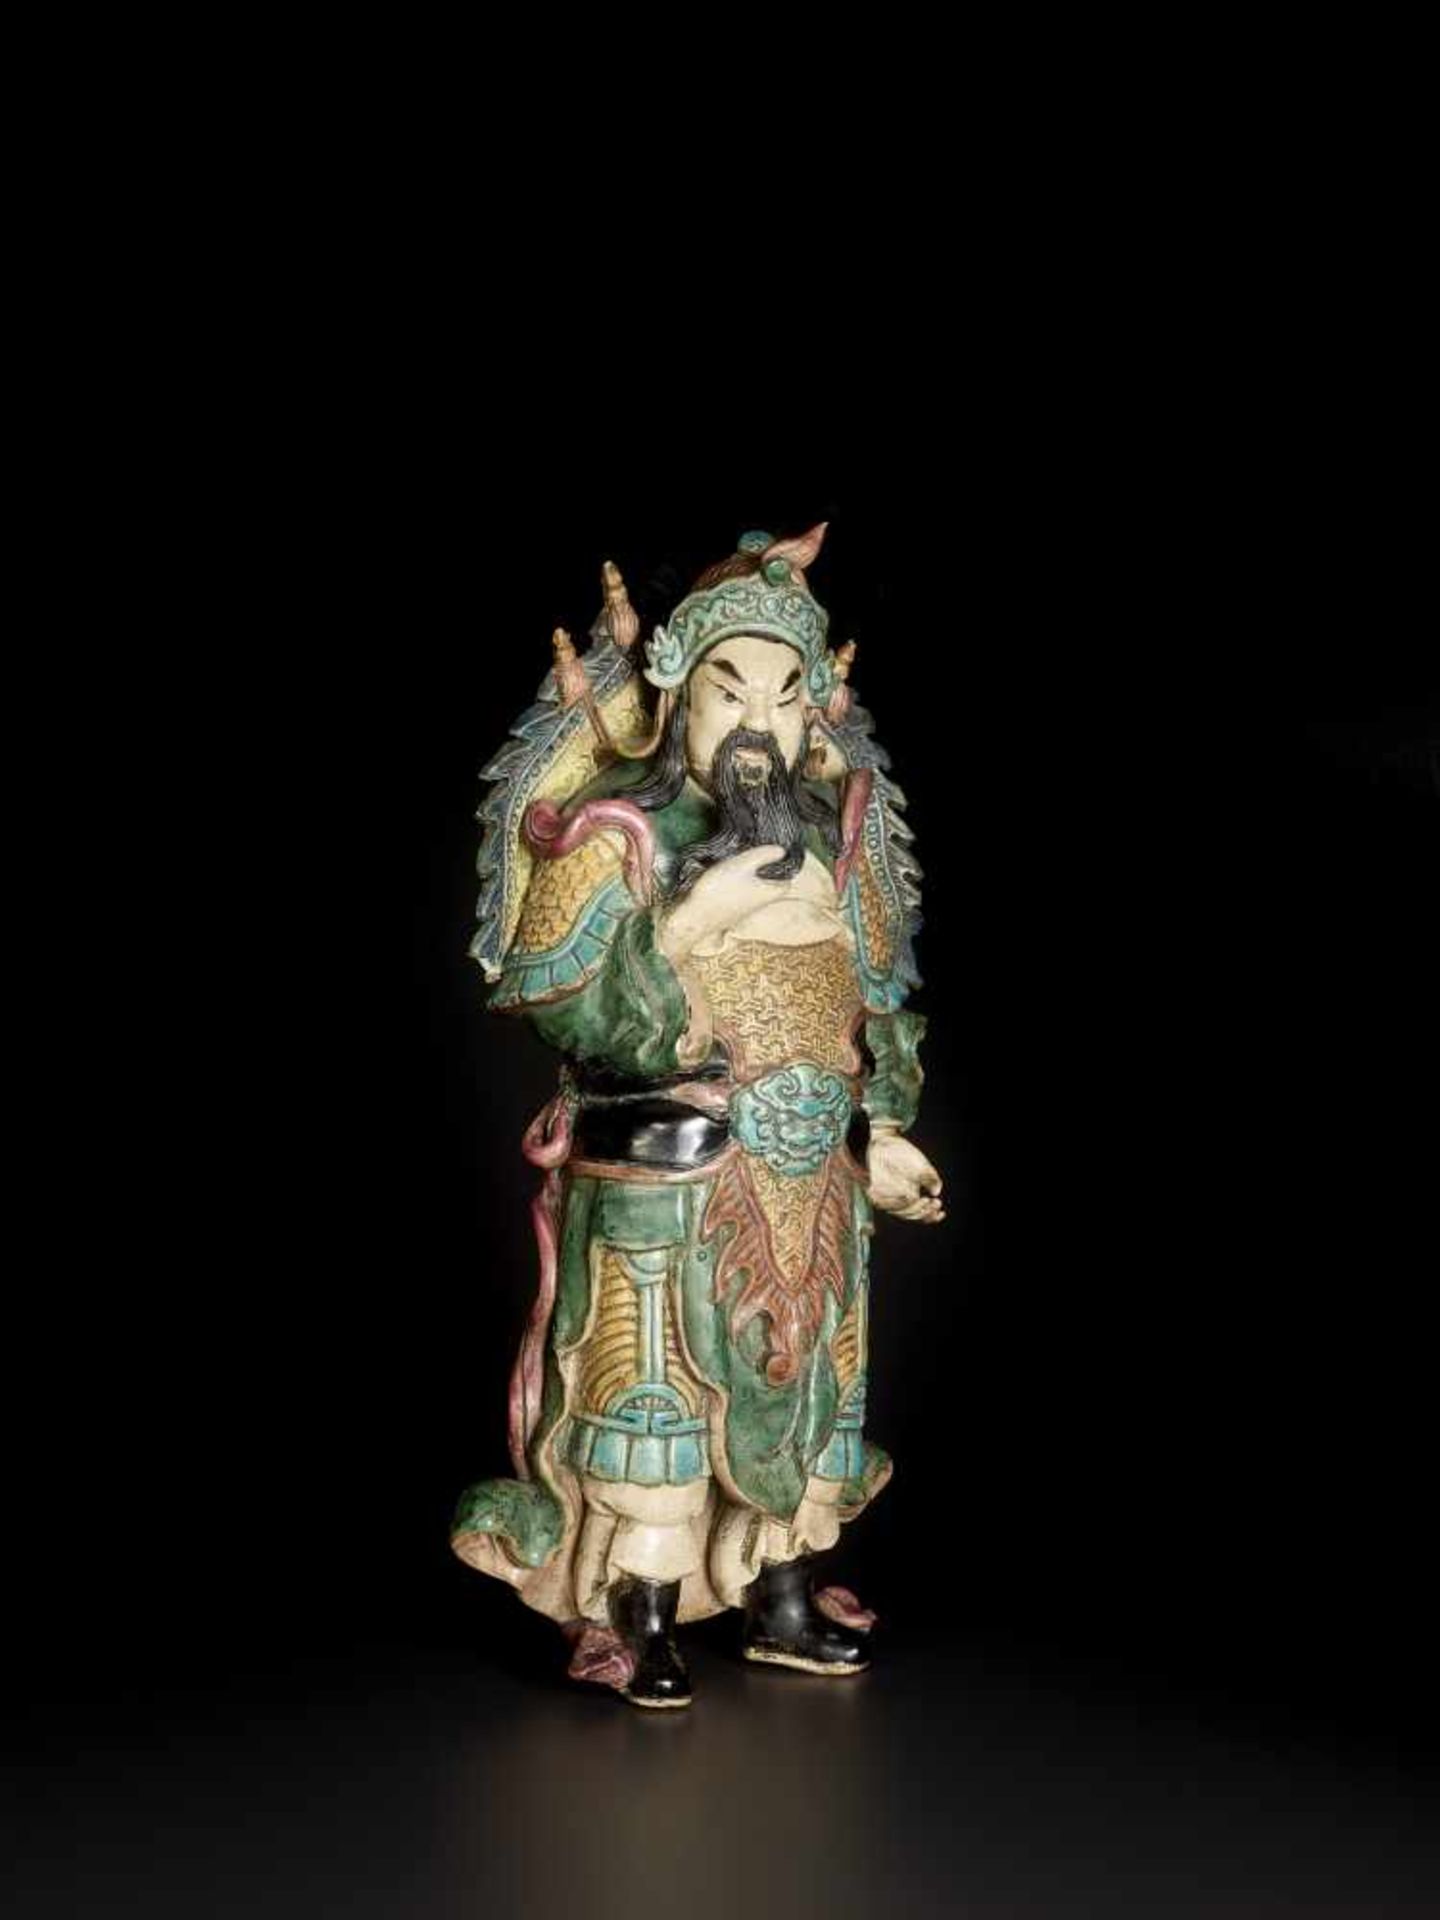 A FAHUA STATUE OF GUANDI, QINGChina, 17th-19th century. The neatly modelled figure glazed in - Image 6 of 6